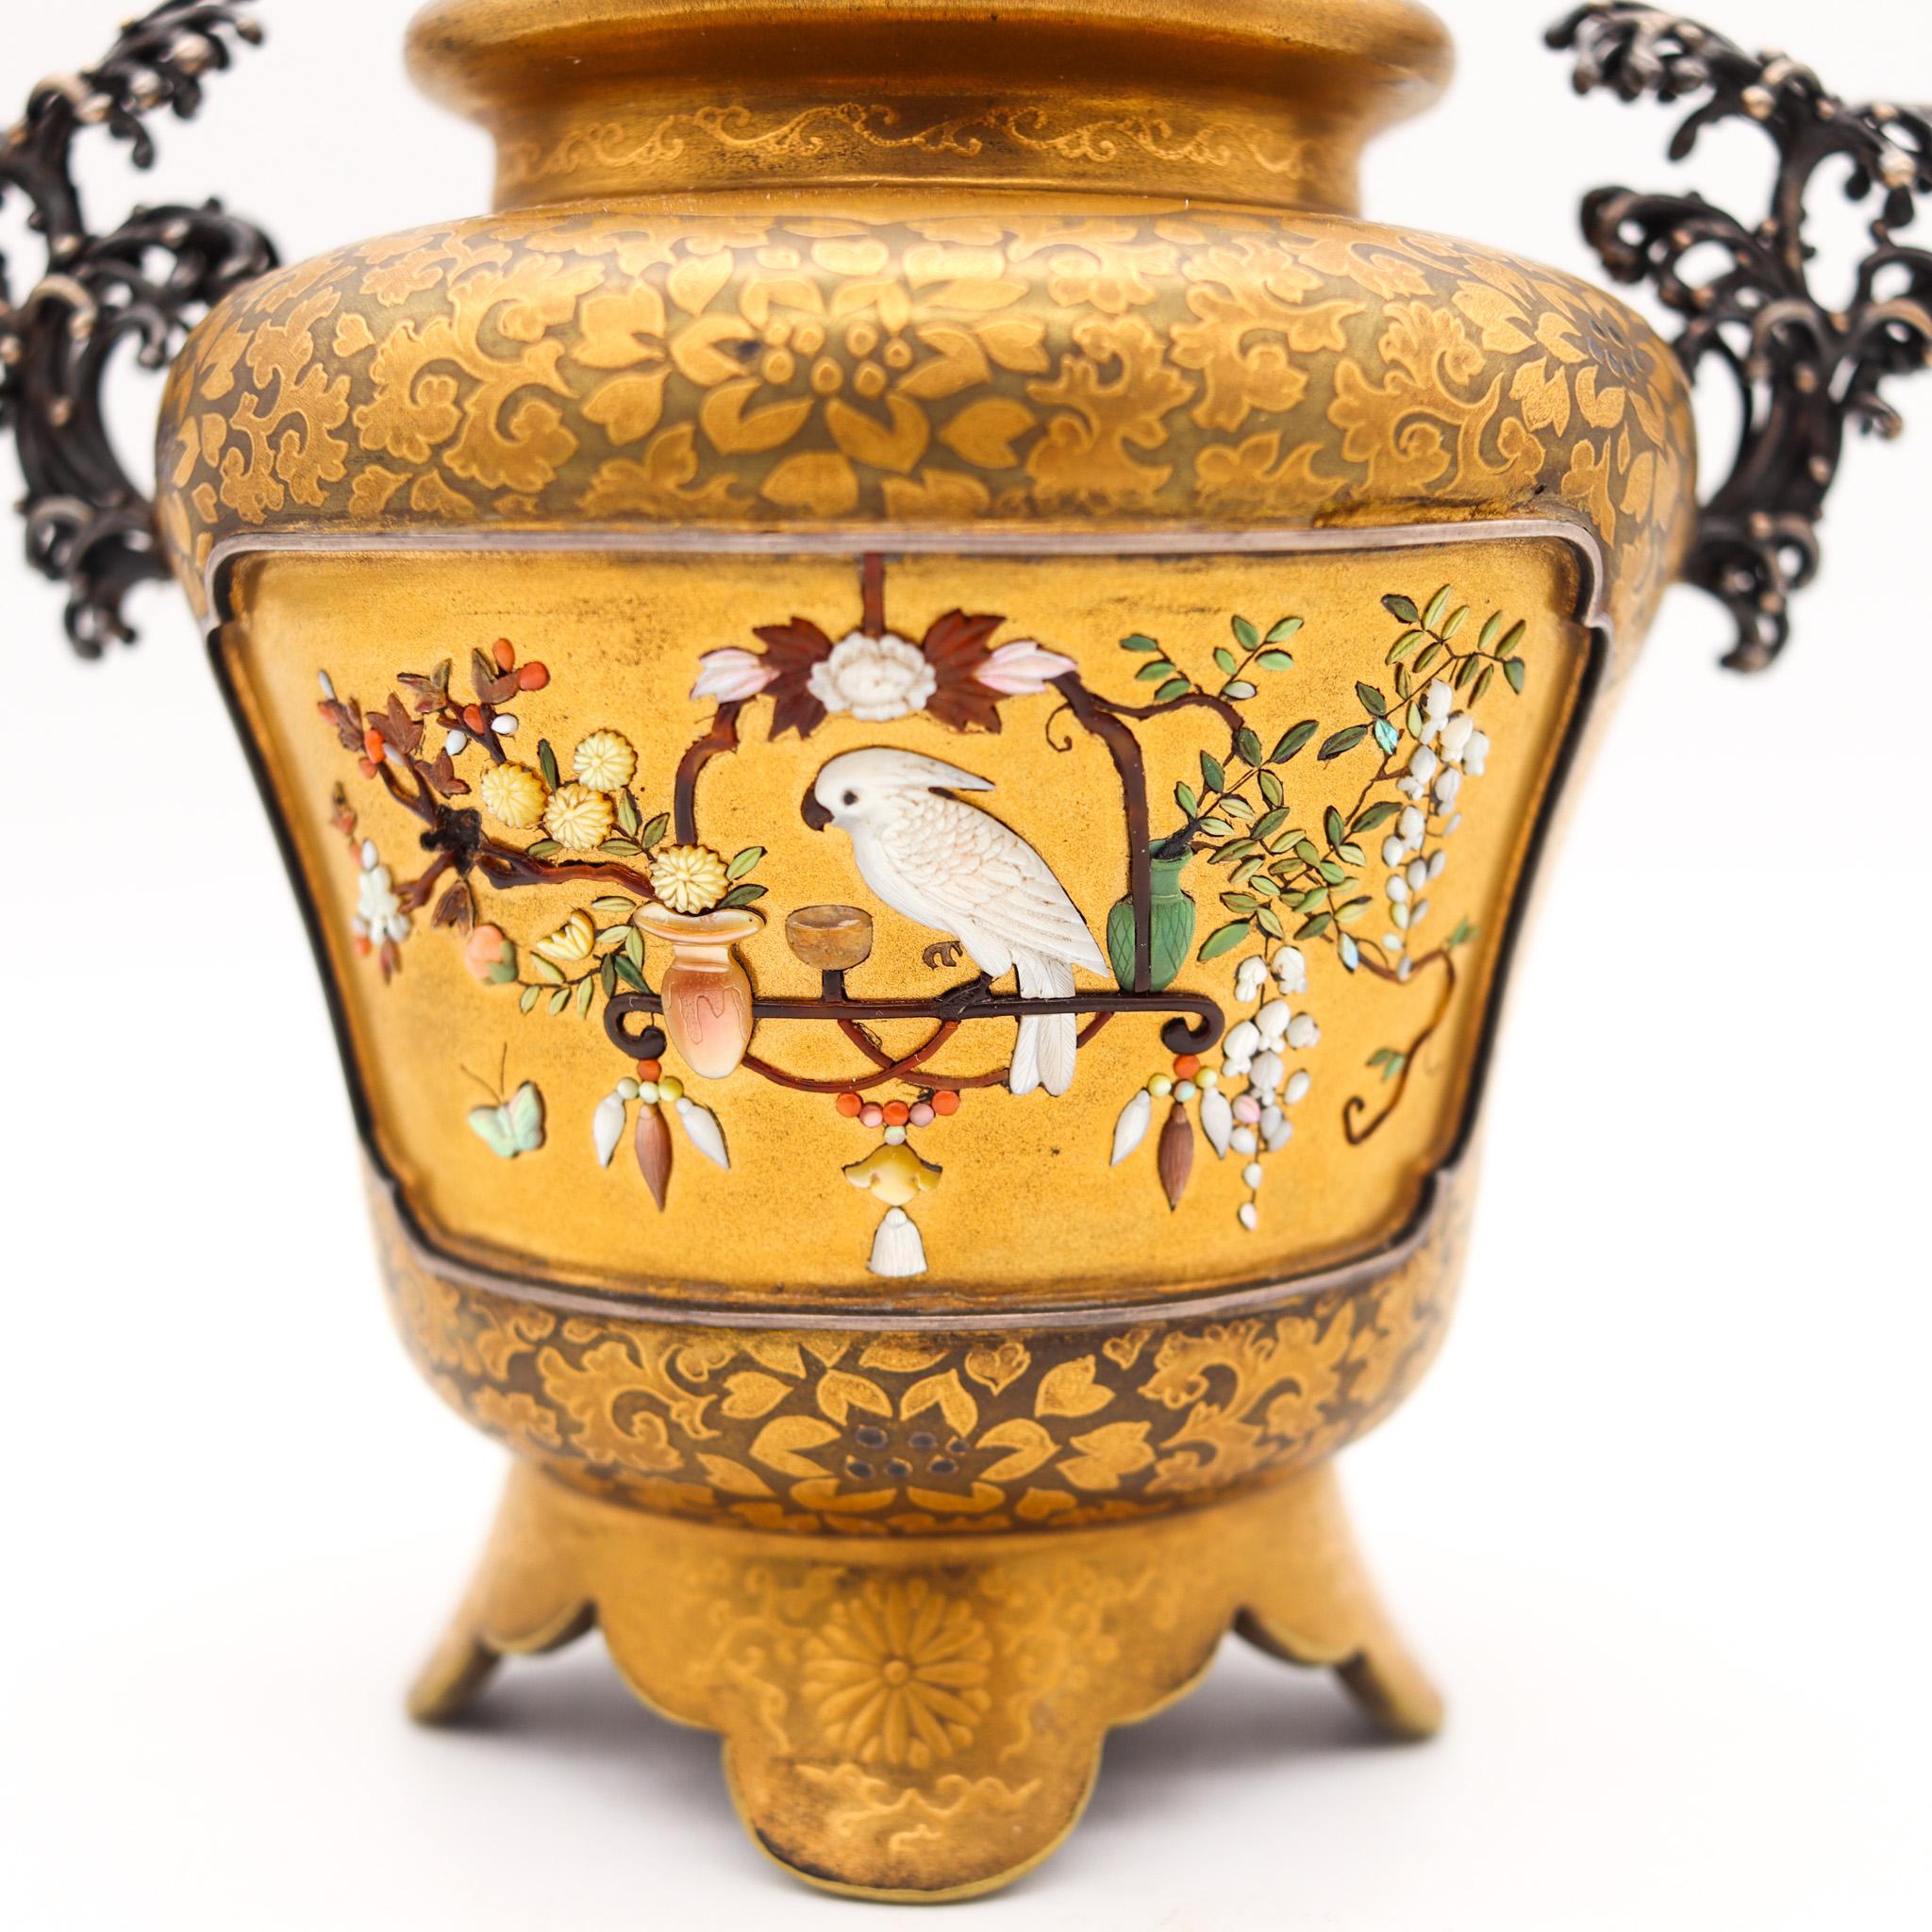 Japan 1890 Meiji Shibayama Round Urn in Gilded Wood and Sterling Silver In Excellent Condition For Sale In Miami, FL